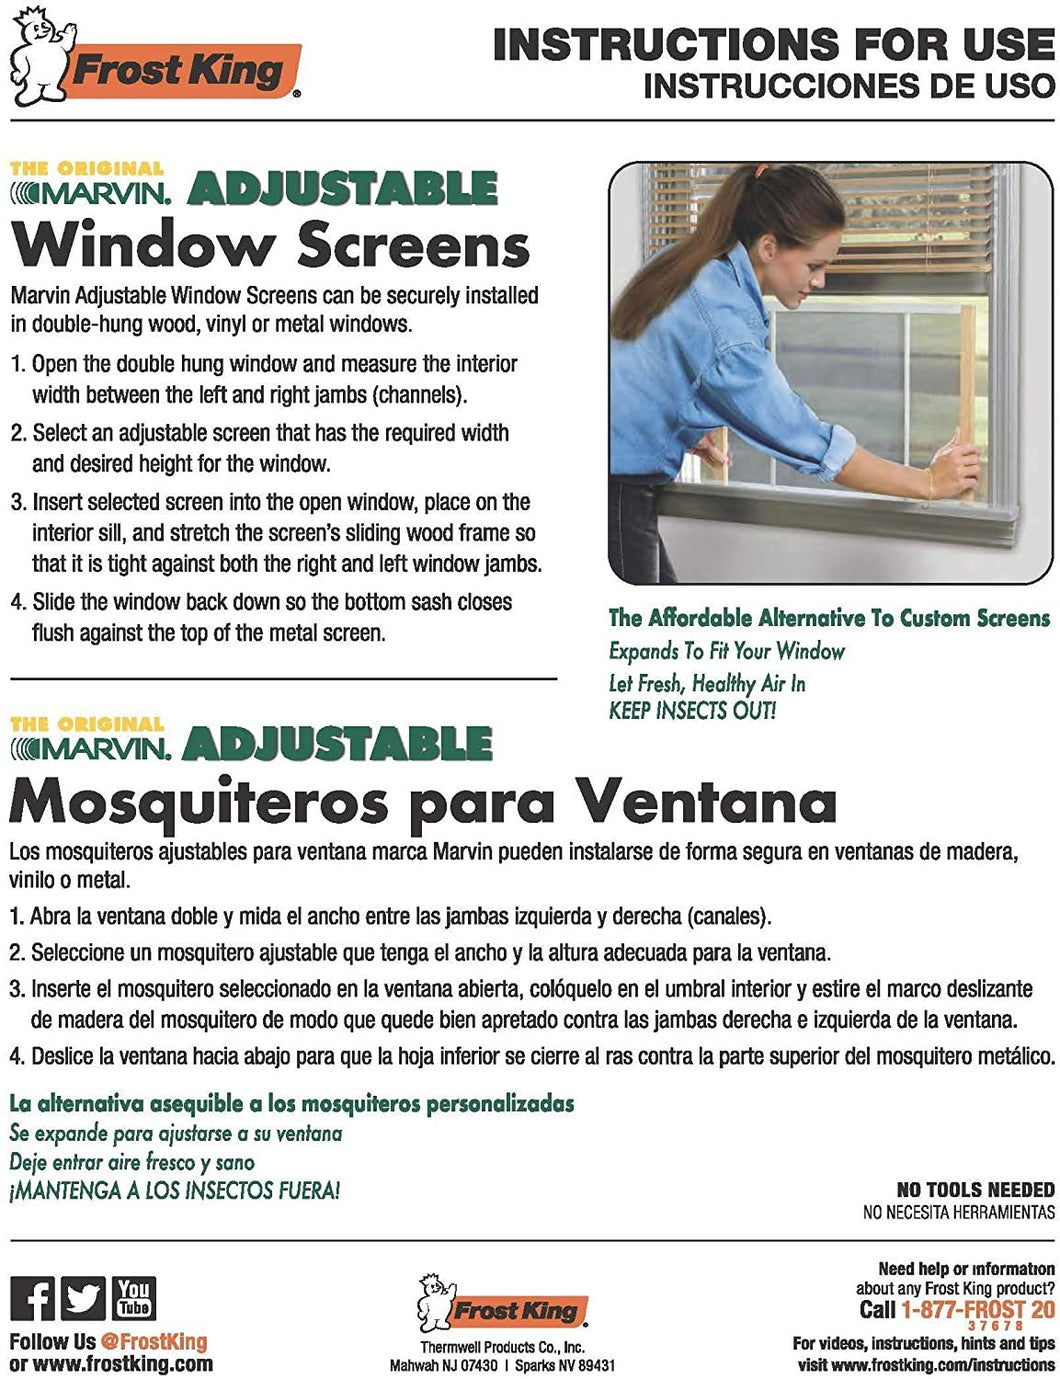 Frost King WB Marvin Adjustable Window Screen